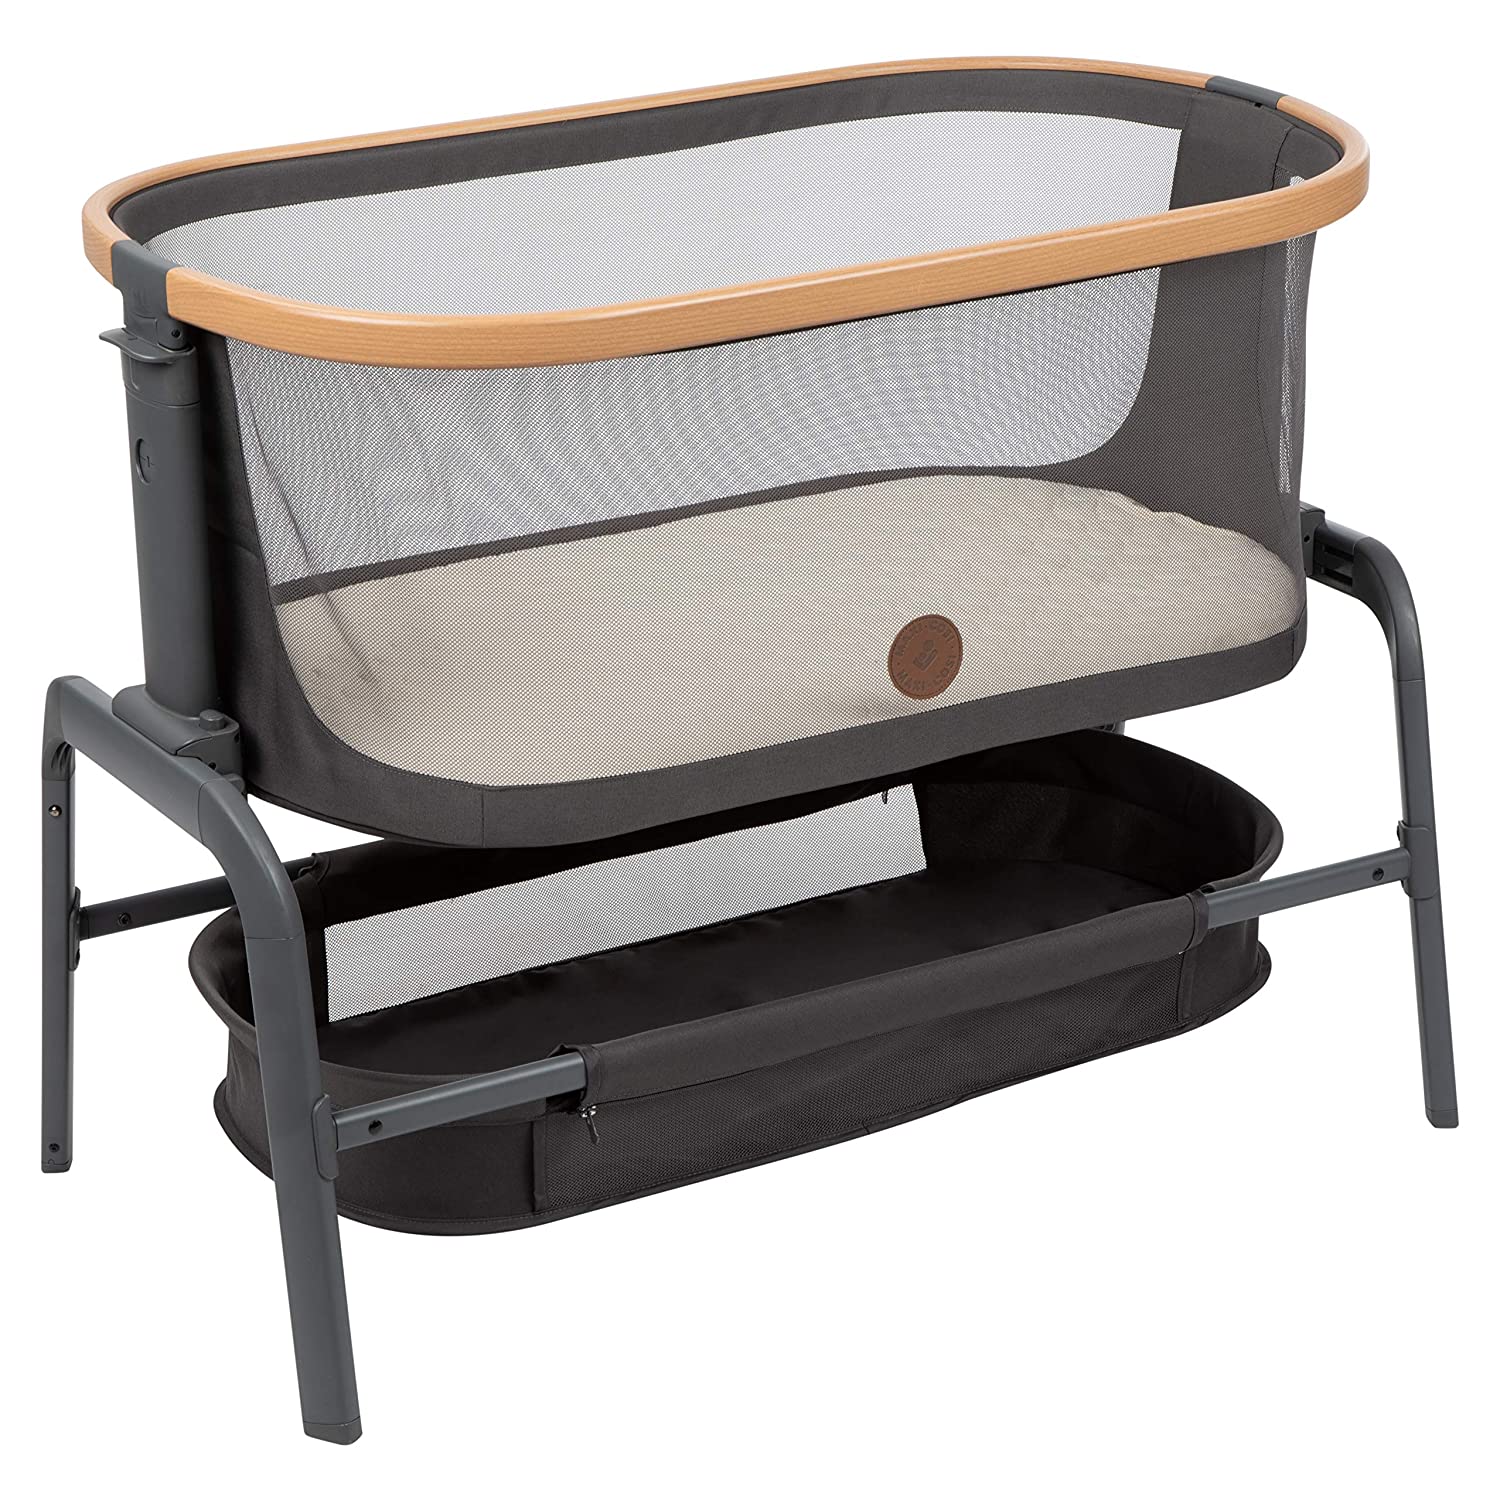 best bassinet for baby, maxi-cosi bassinet